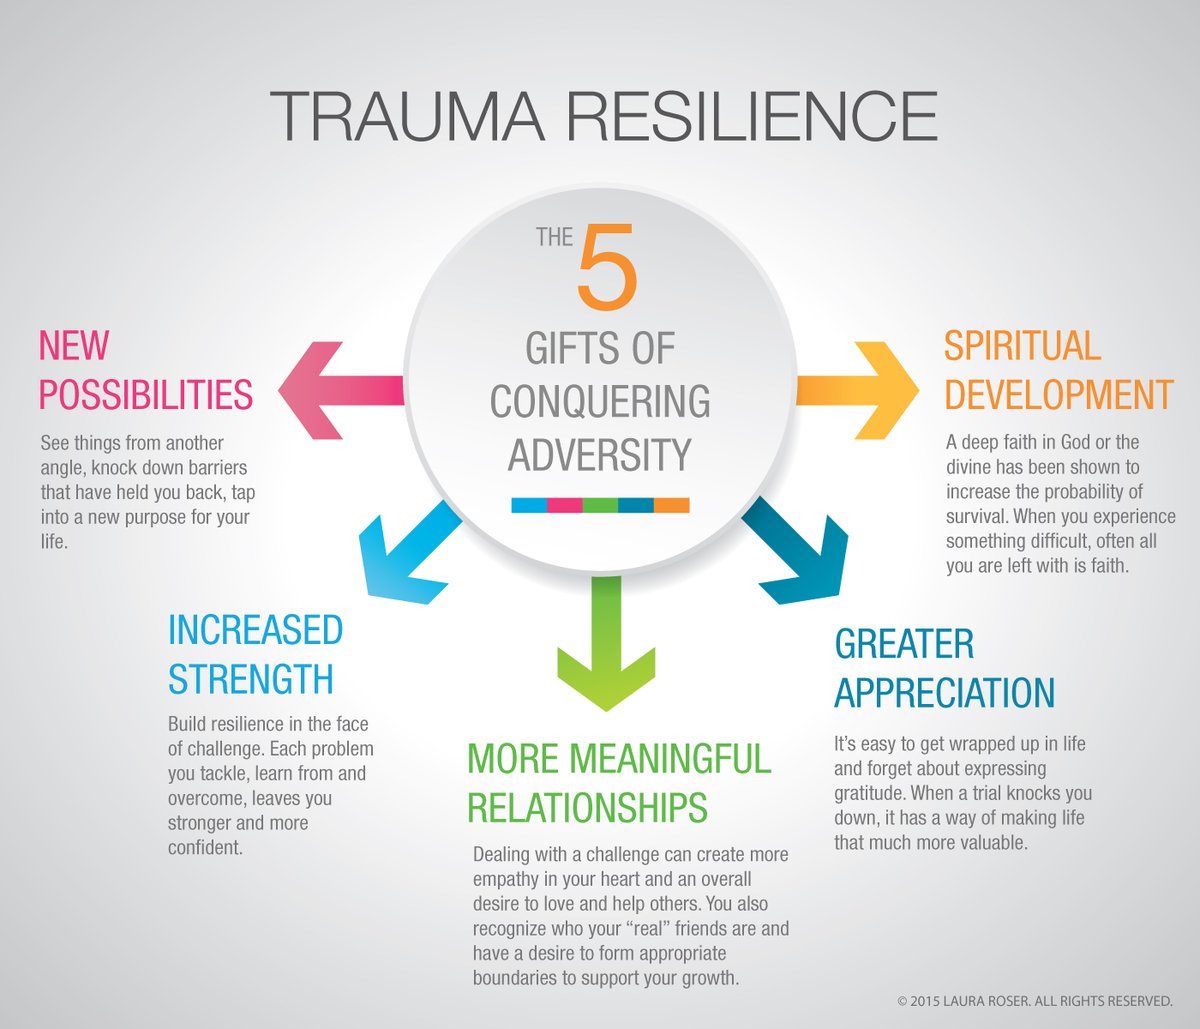 We can help traumatized students channel their pain in positive ways through advocacy as a way to achieve post-traumatic growth. Here’s how: generationnext.com.au/2012/02/top-ti… #educ5199g #traumainformeded